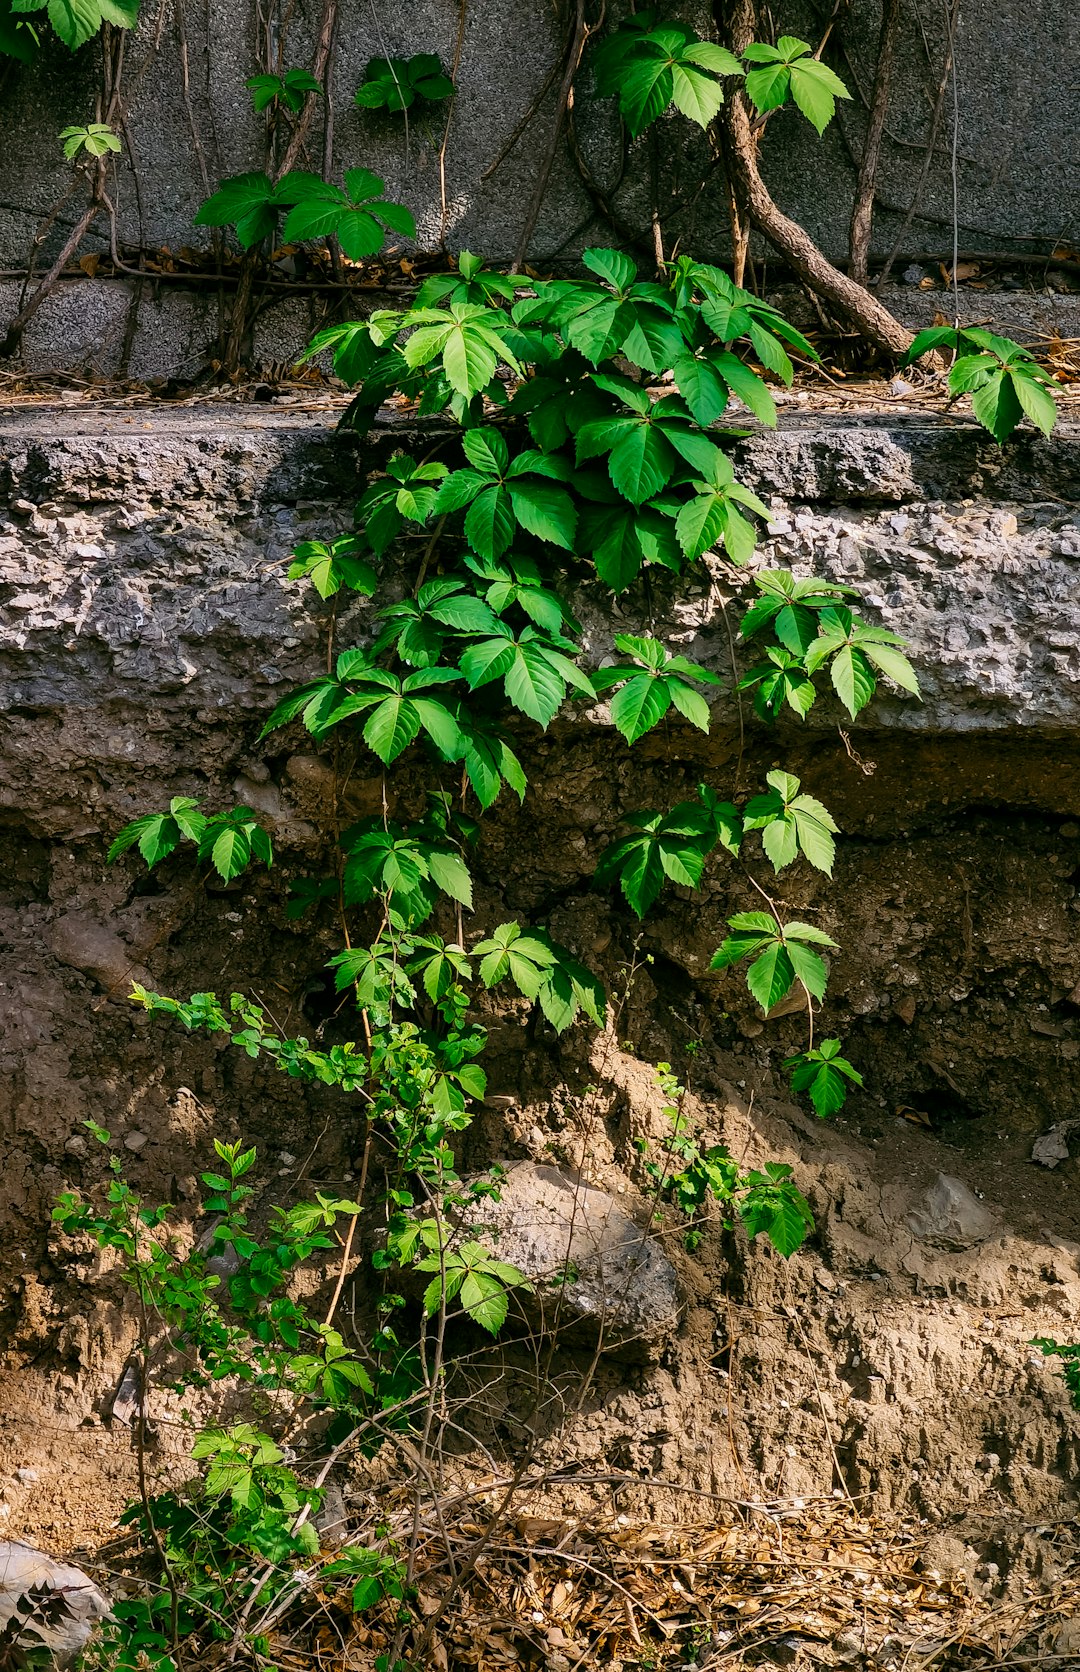 green leaves on gray concrete wall